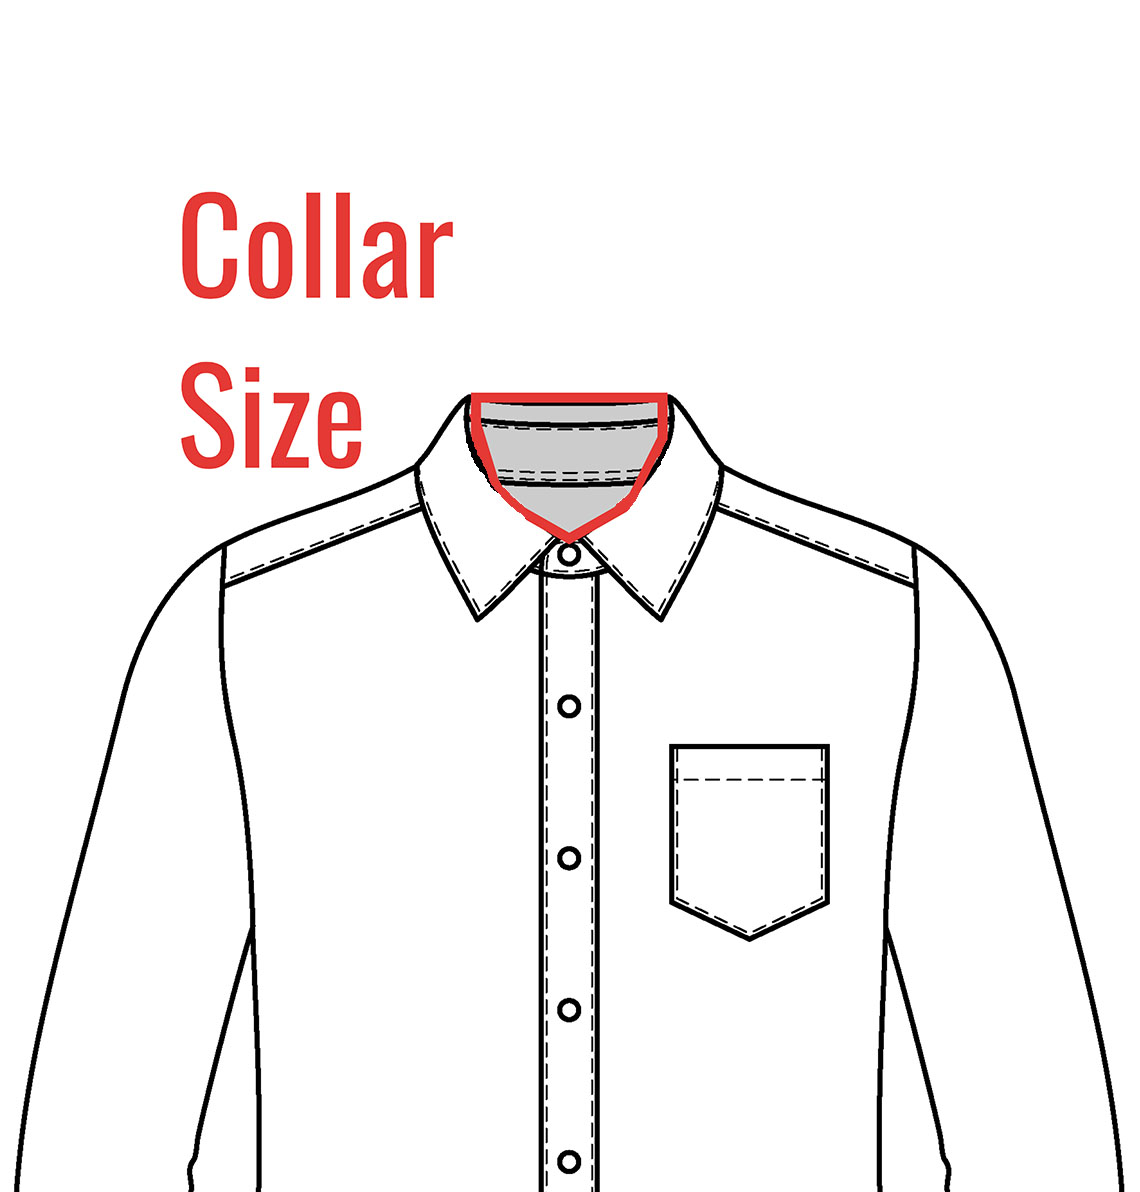 Sizing | How To Find Your Proper Inseam Size